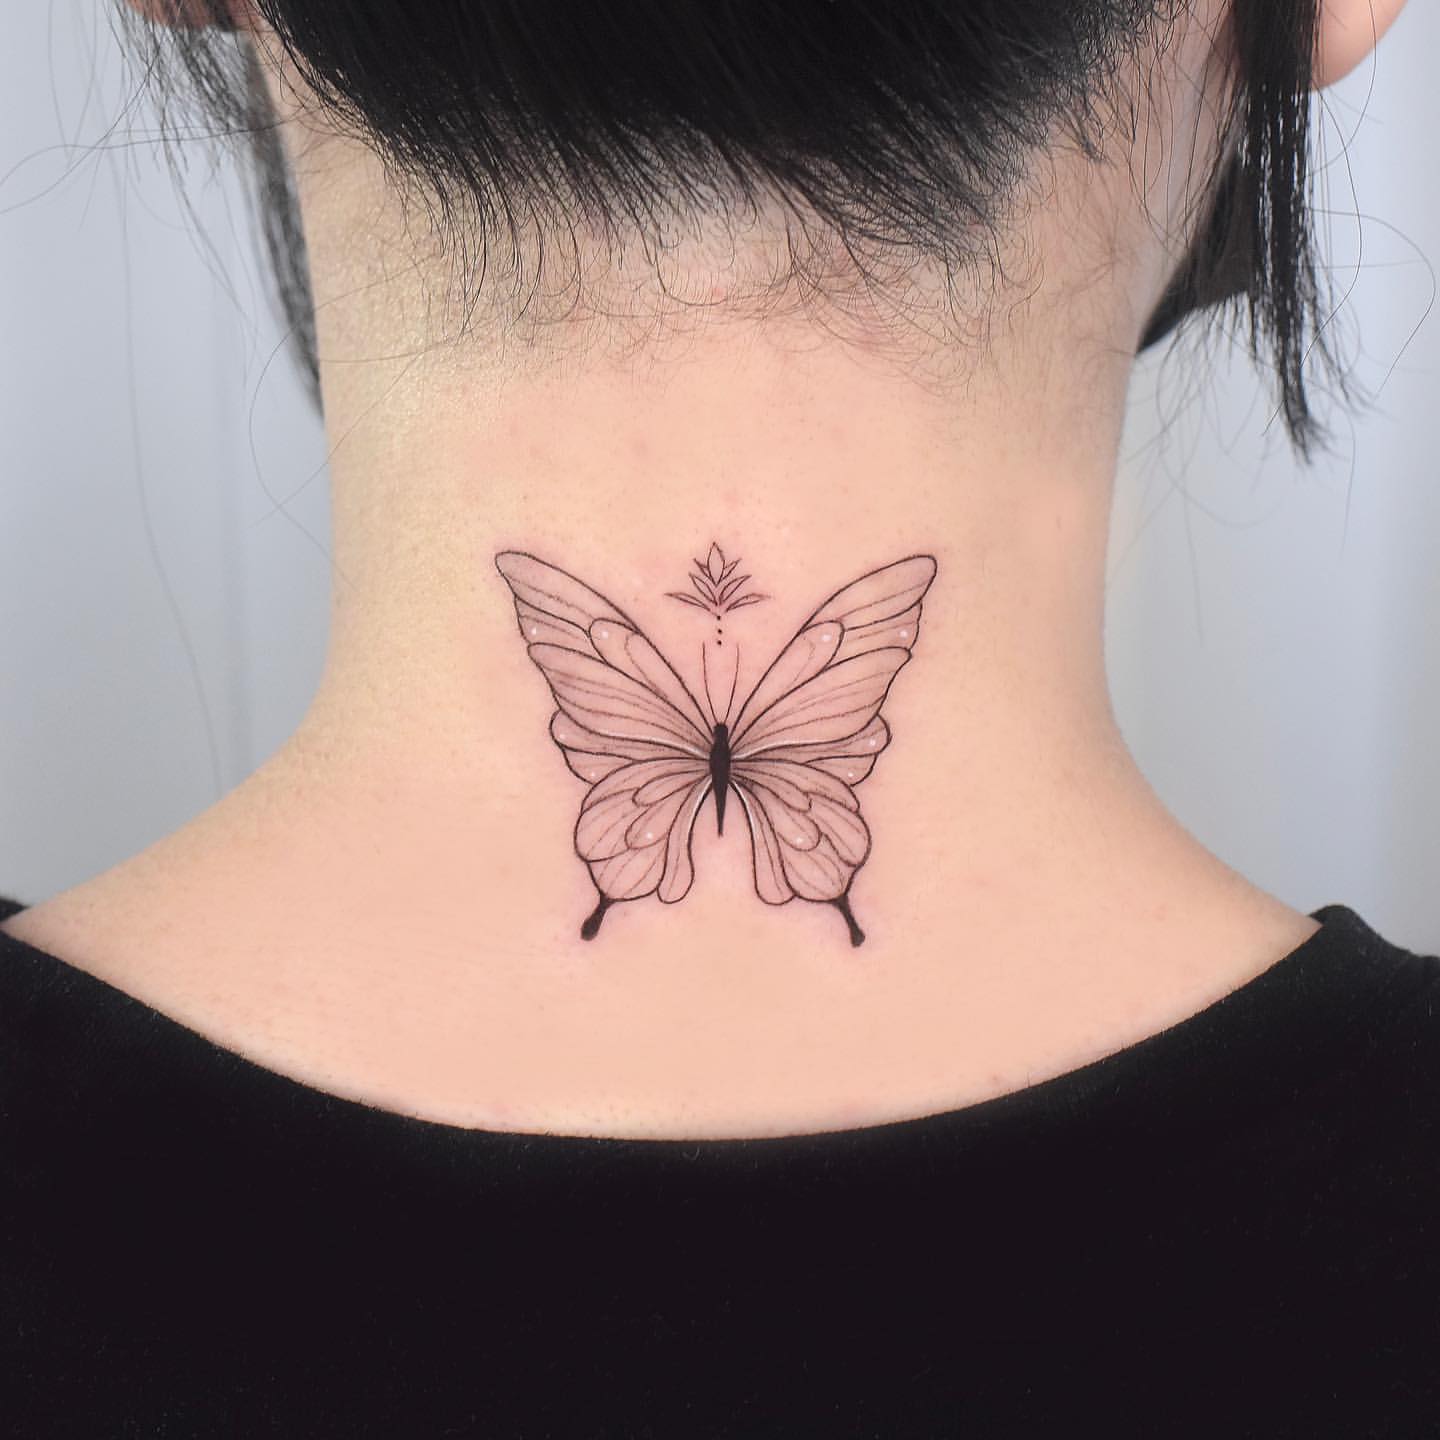 Cool butterfly tattoo on back of neck